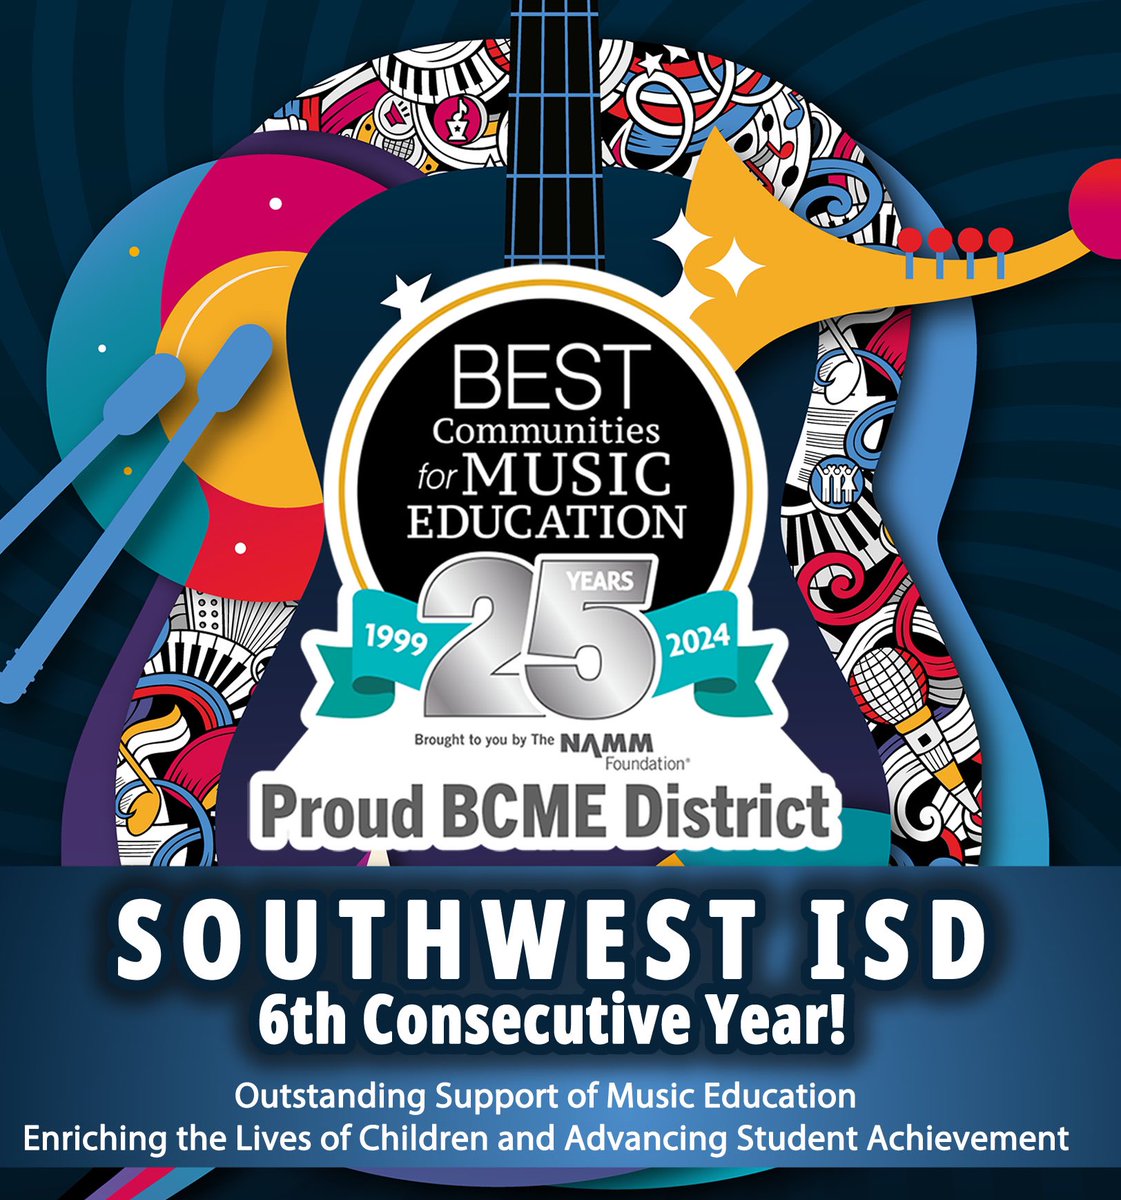 #WeAreSW A round of applause for Southwest ISD for being recognized as a #BestCommunitiesforMusicEducation by the @nammfoundation! Congratulations to our dedicated students, teachers, administrators, Board, and community members! This is our 6th consecutive year!! @swisd